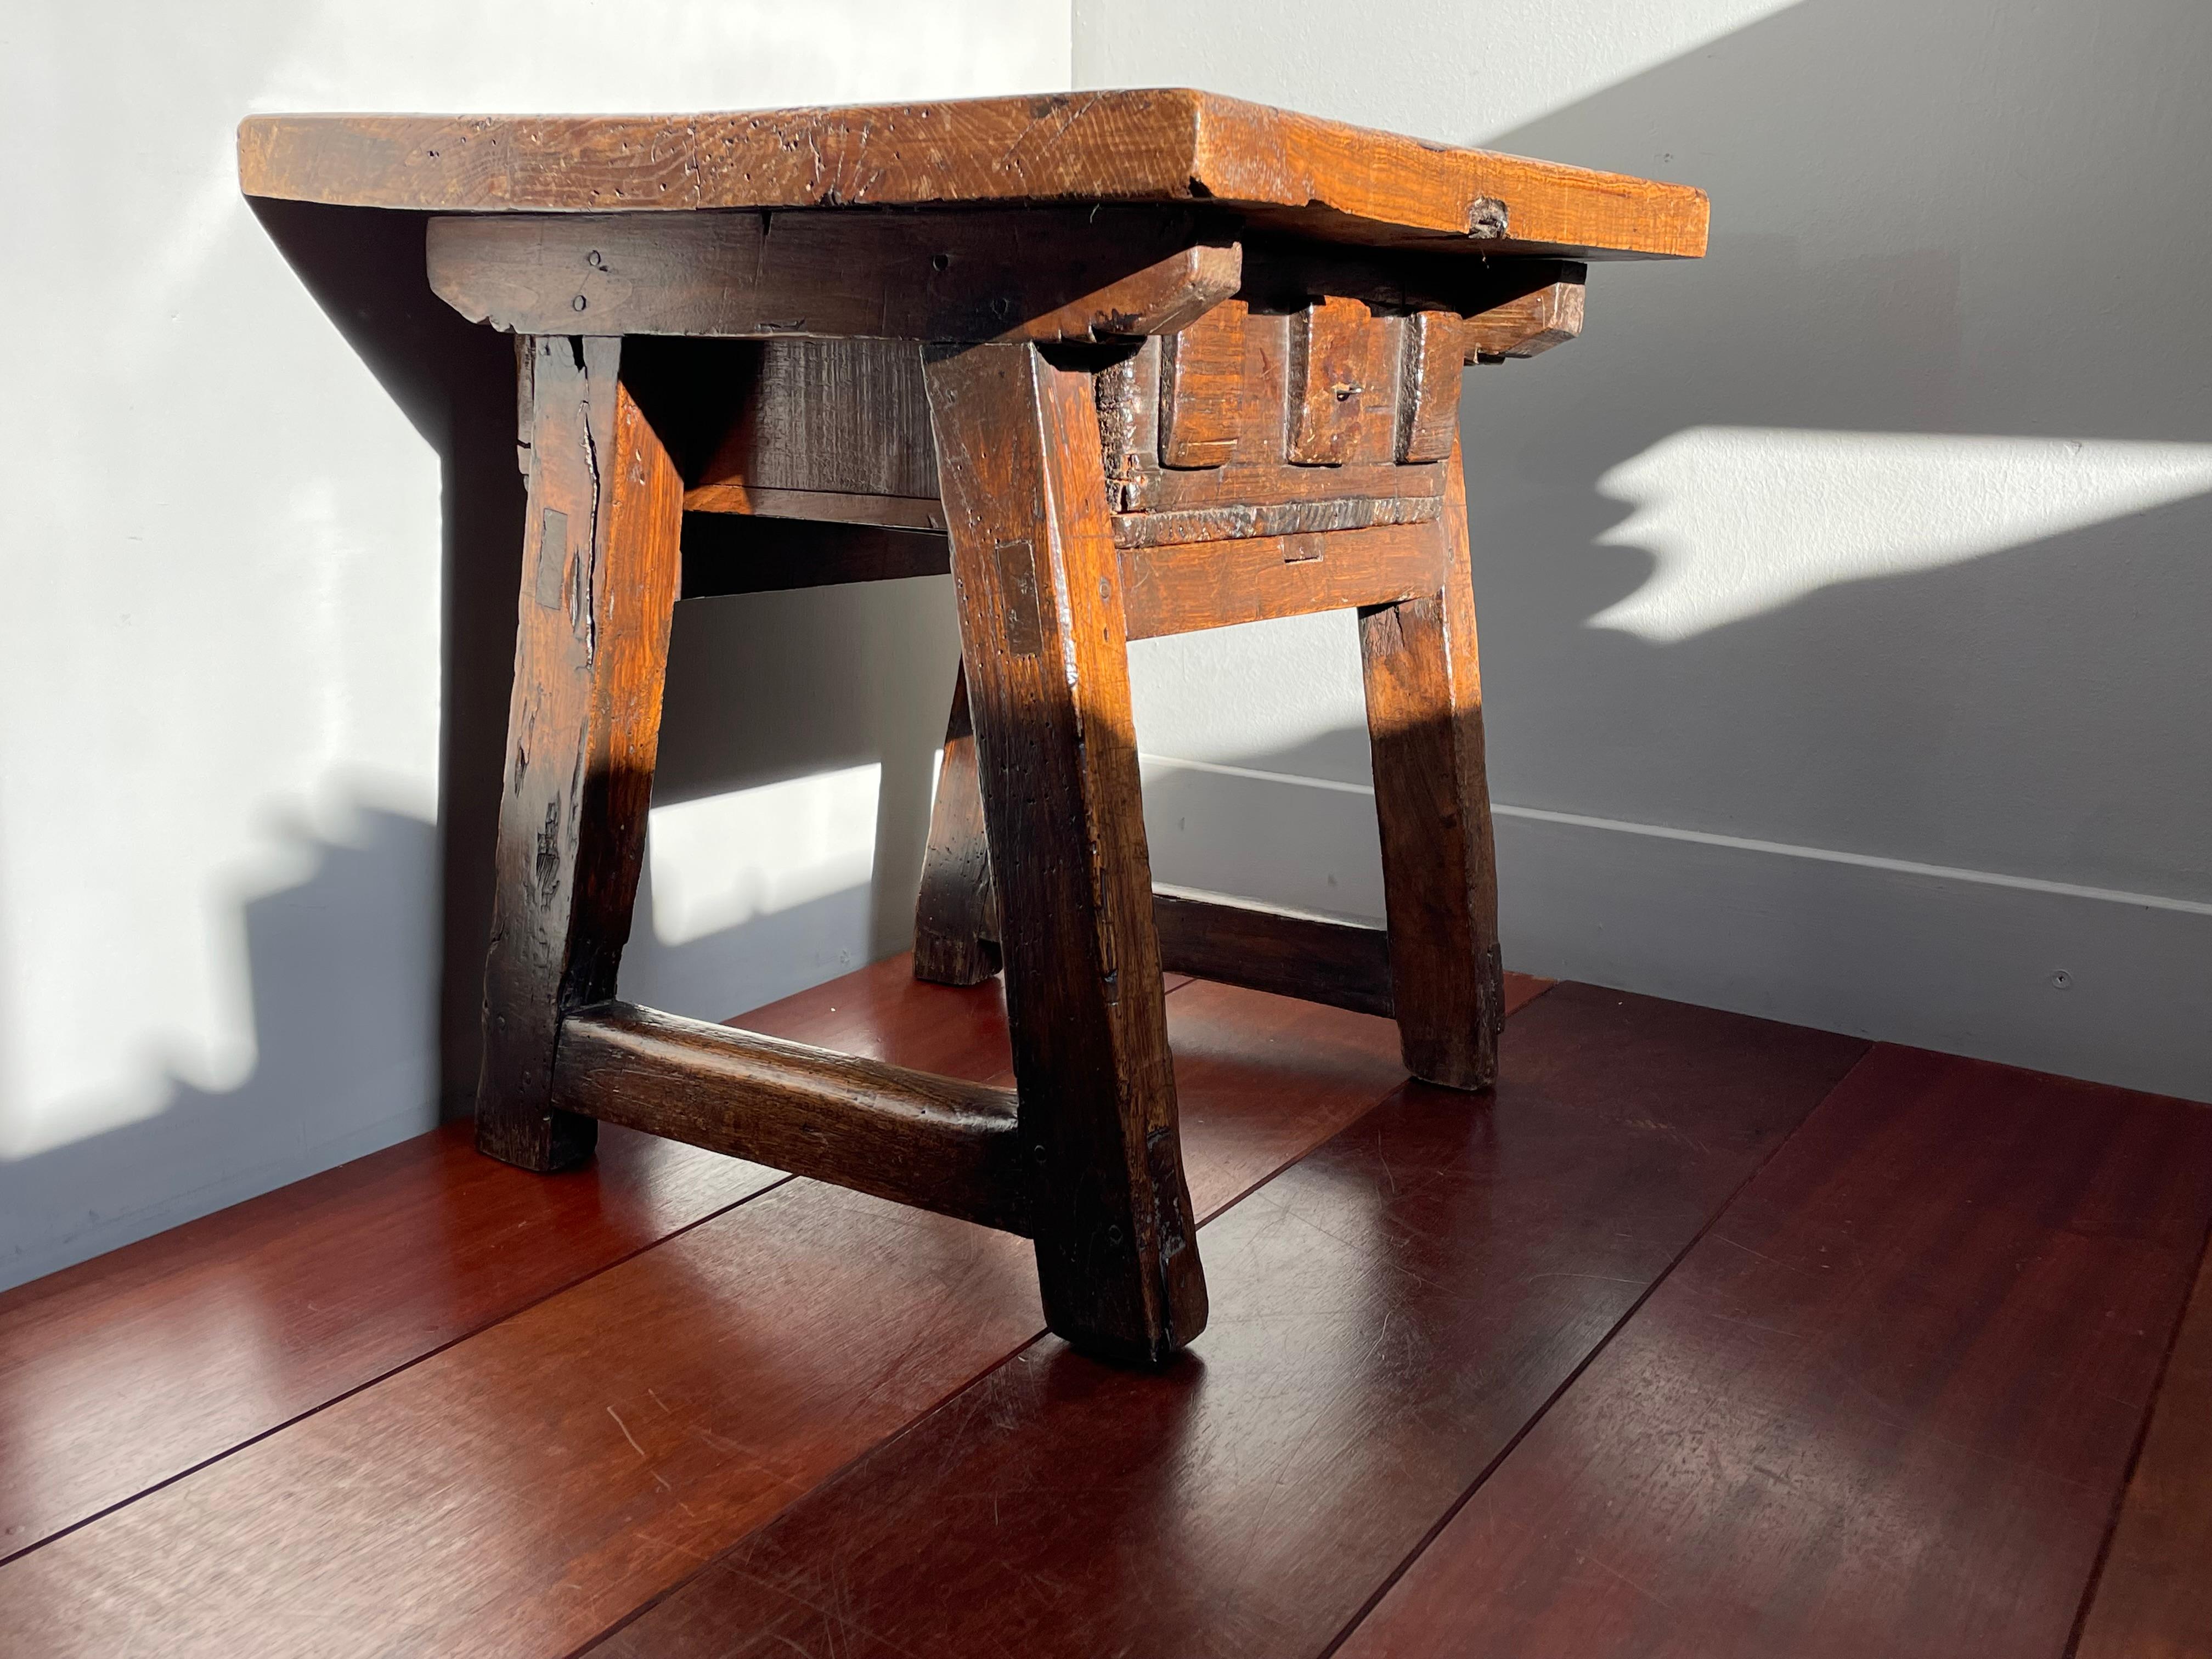 Beautifully time-worn, antique, Southern European, chestnut wood end or side table.

This relatively small size antique table is a joy to look at and the history of this kind of table makes it very interesting as well. Pay tables or paying tables